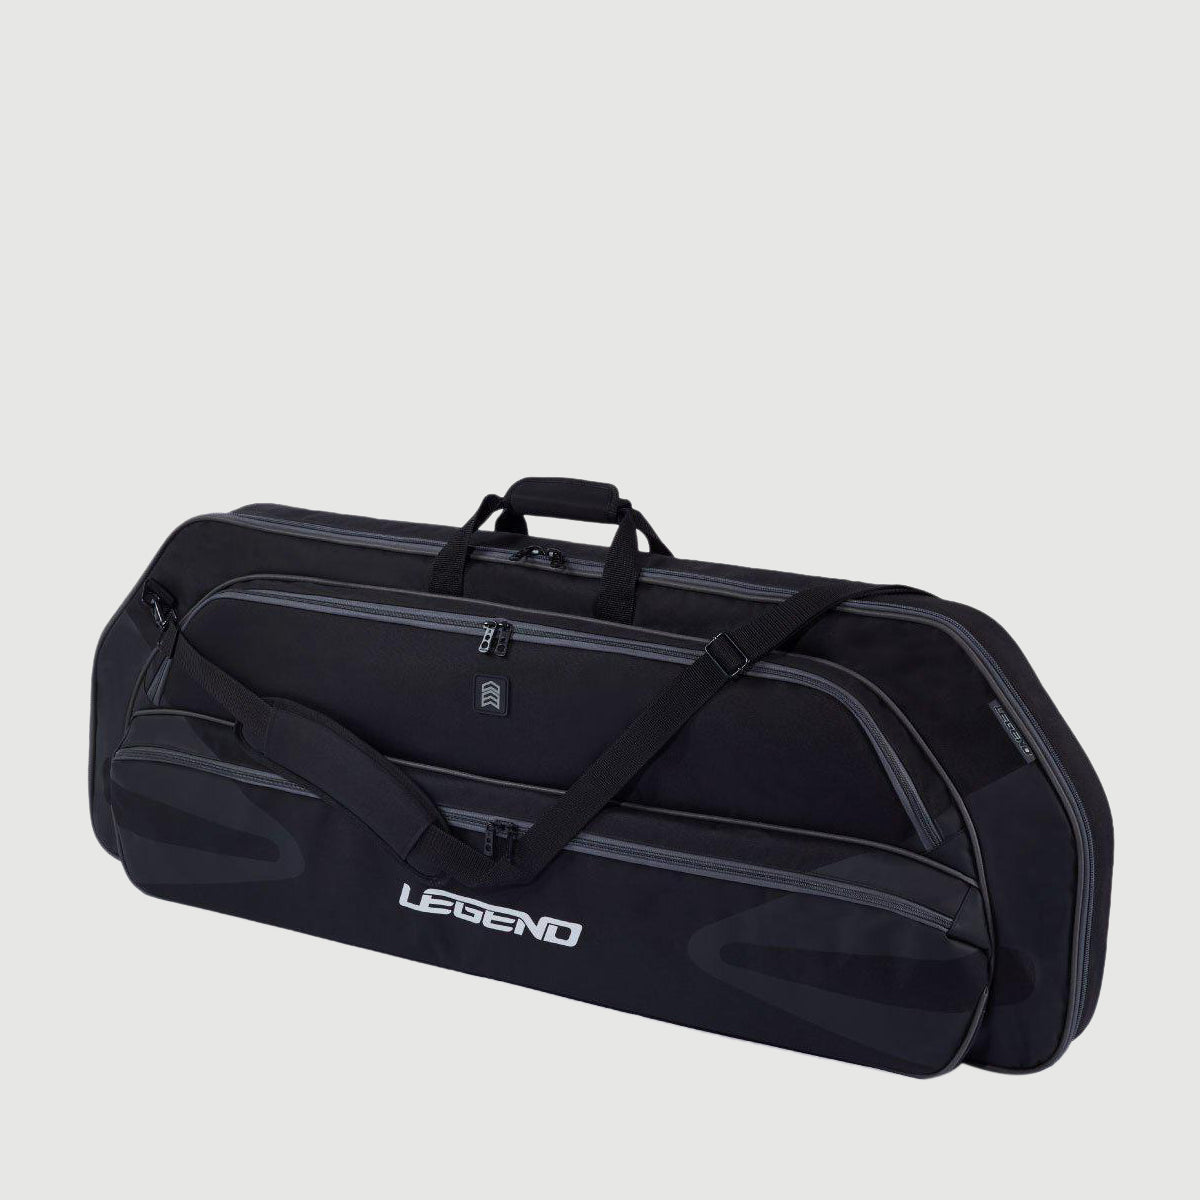 Protect your bow with the Black Monstro Bow Case - Legend Archery,